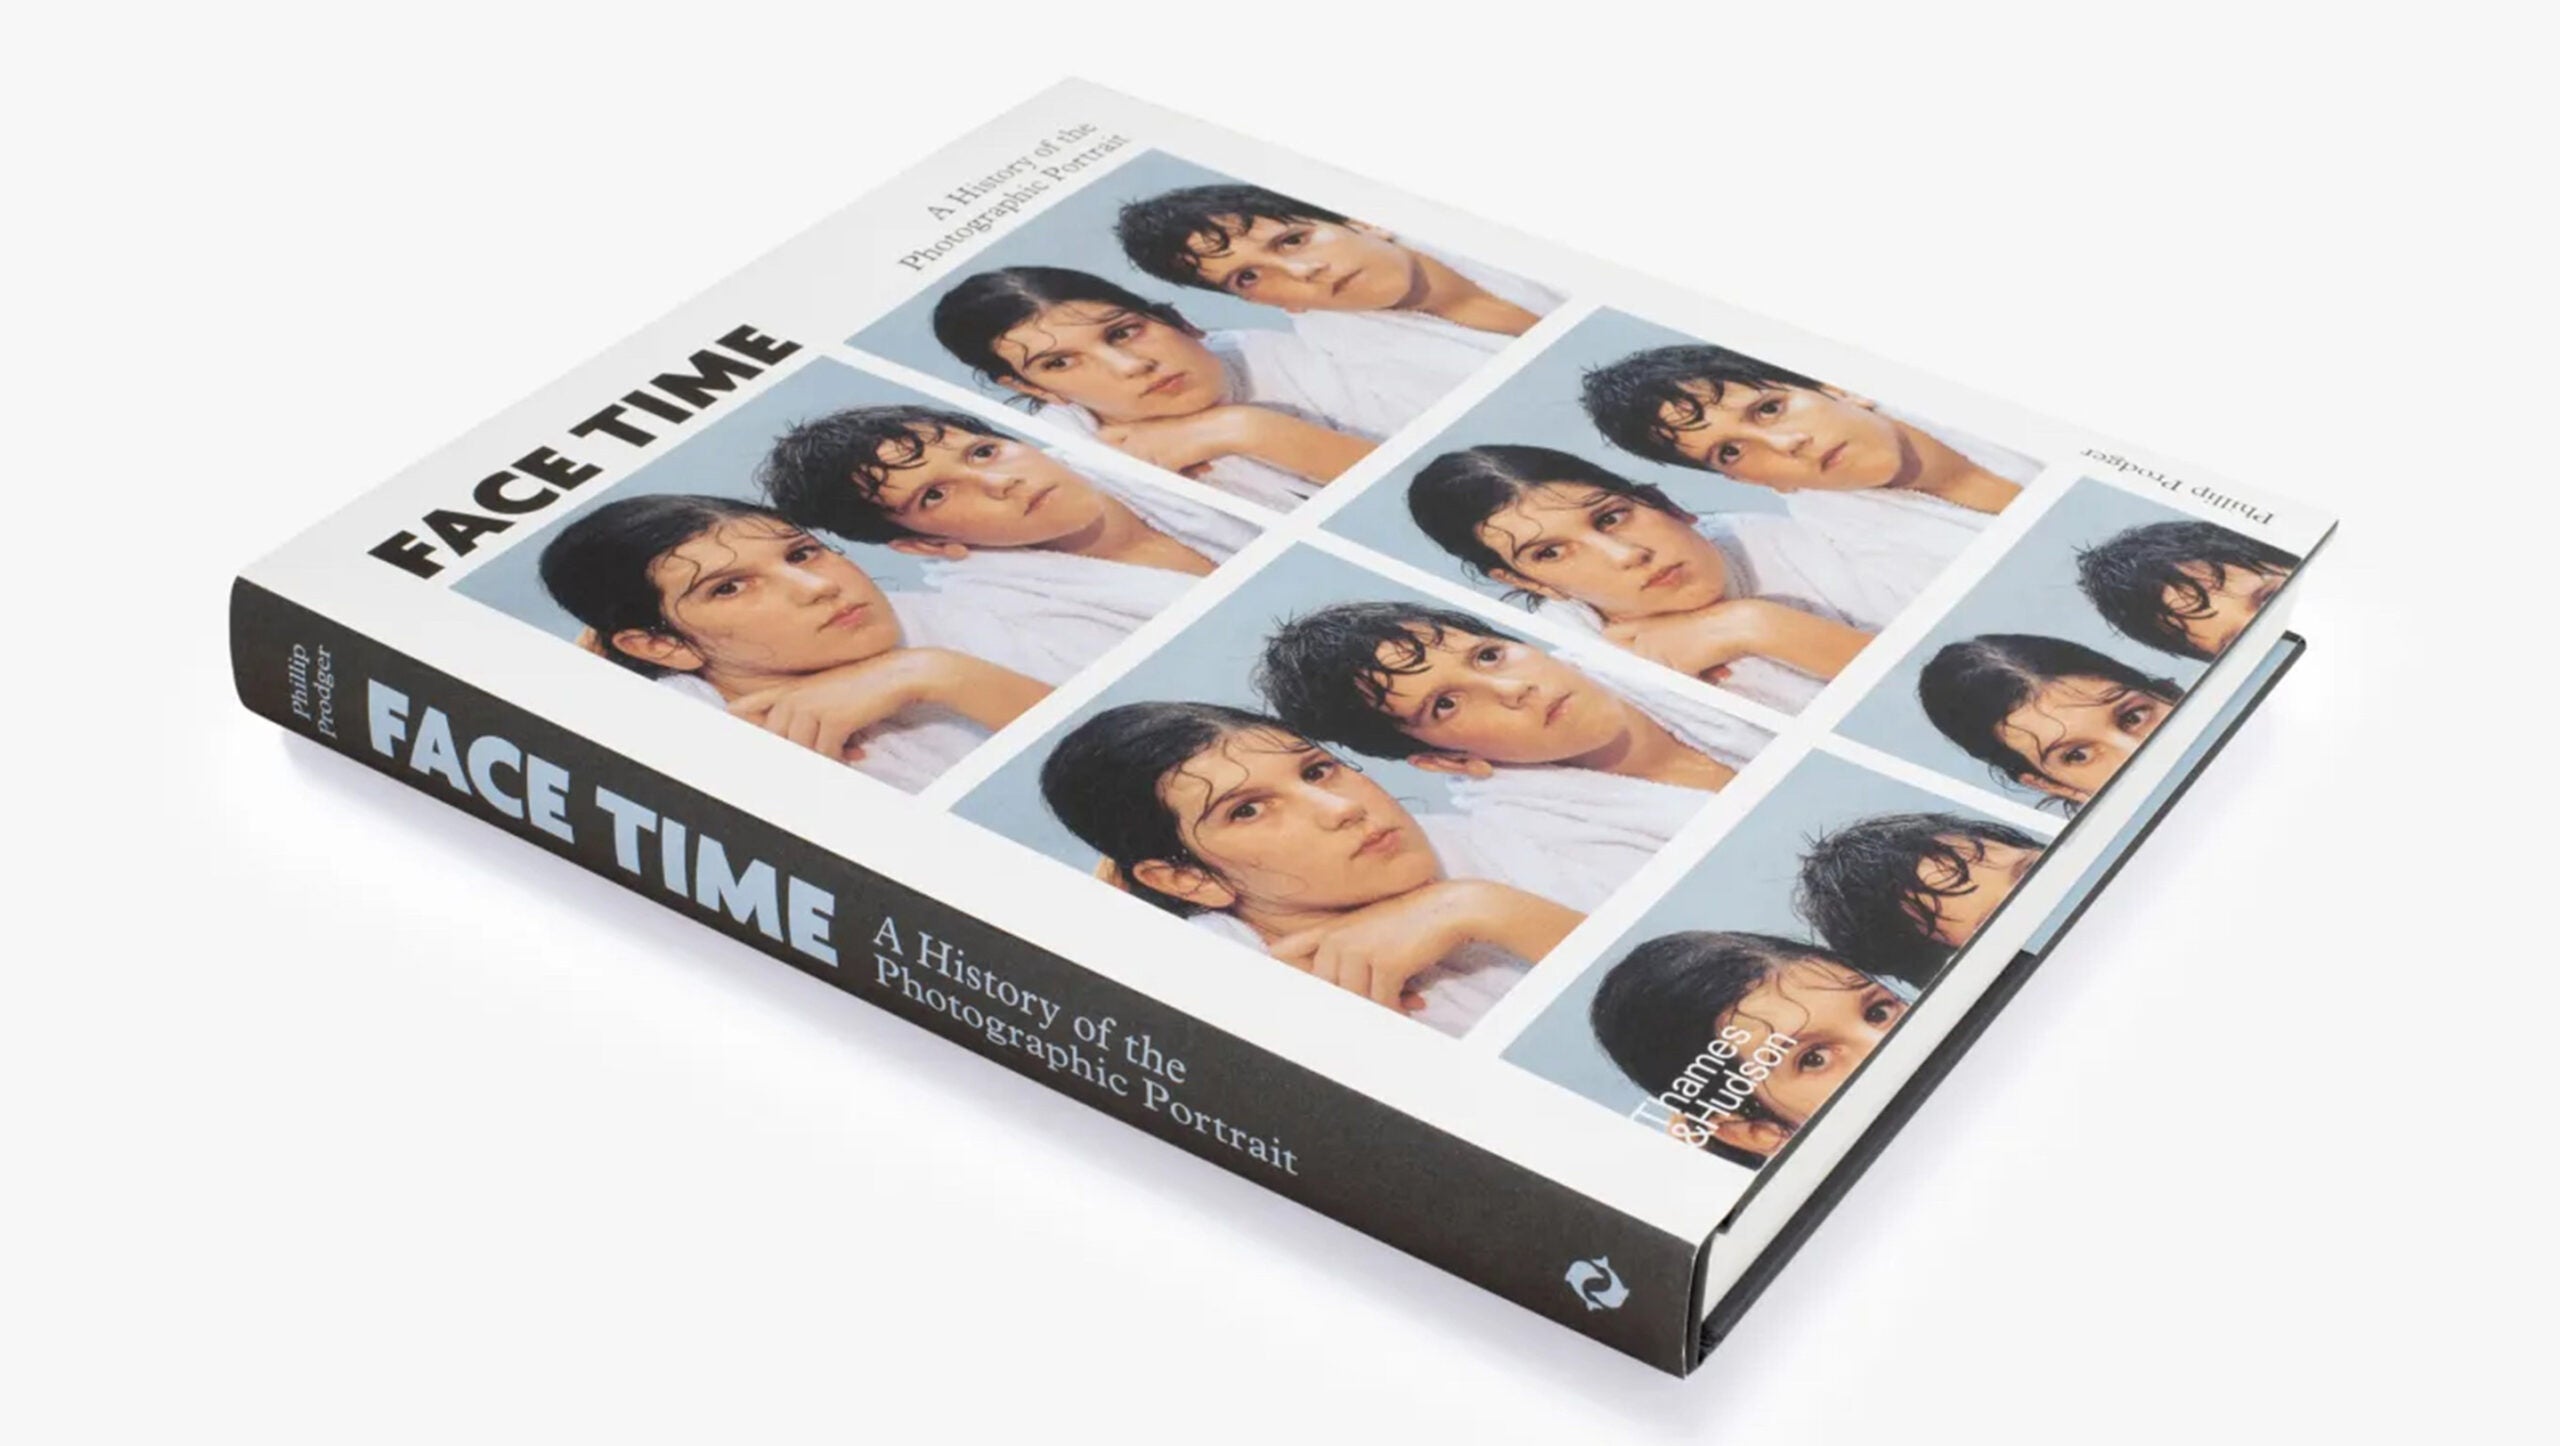 Cover of "Face time - A History of the Photographic Portrait"